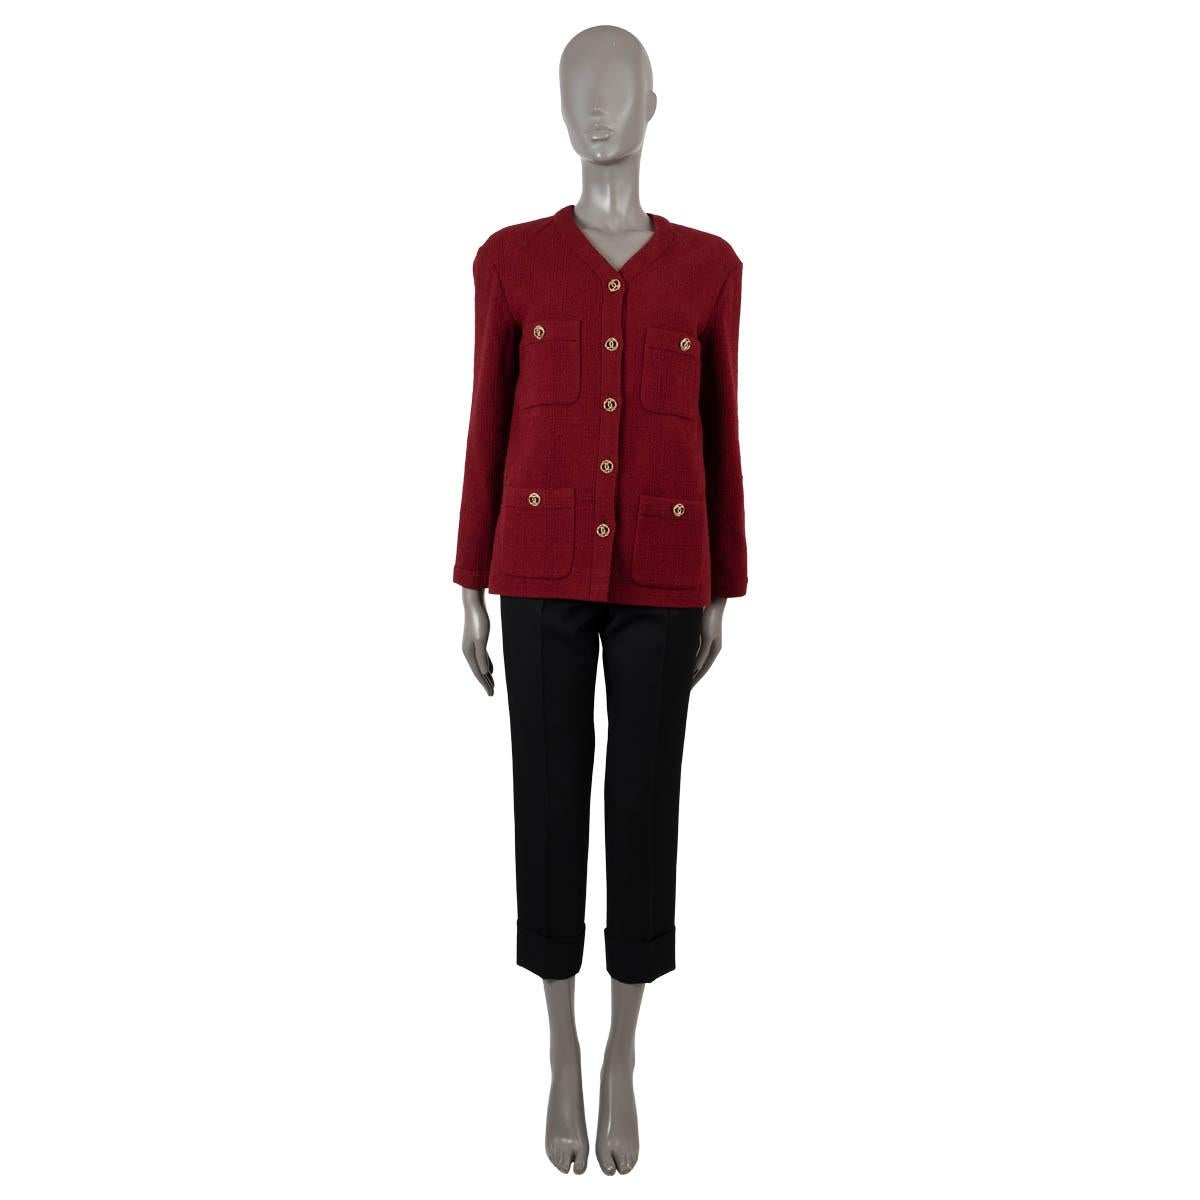 100% authentic Chanel collarless tweed jacket in burgundy wool (100%). Features classic four pocket design, V-neck. Closes with gold-tone metal CC buttons on the front. Lined in silk (100%). Has been worn and is in excellent condition. 

2023